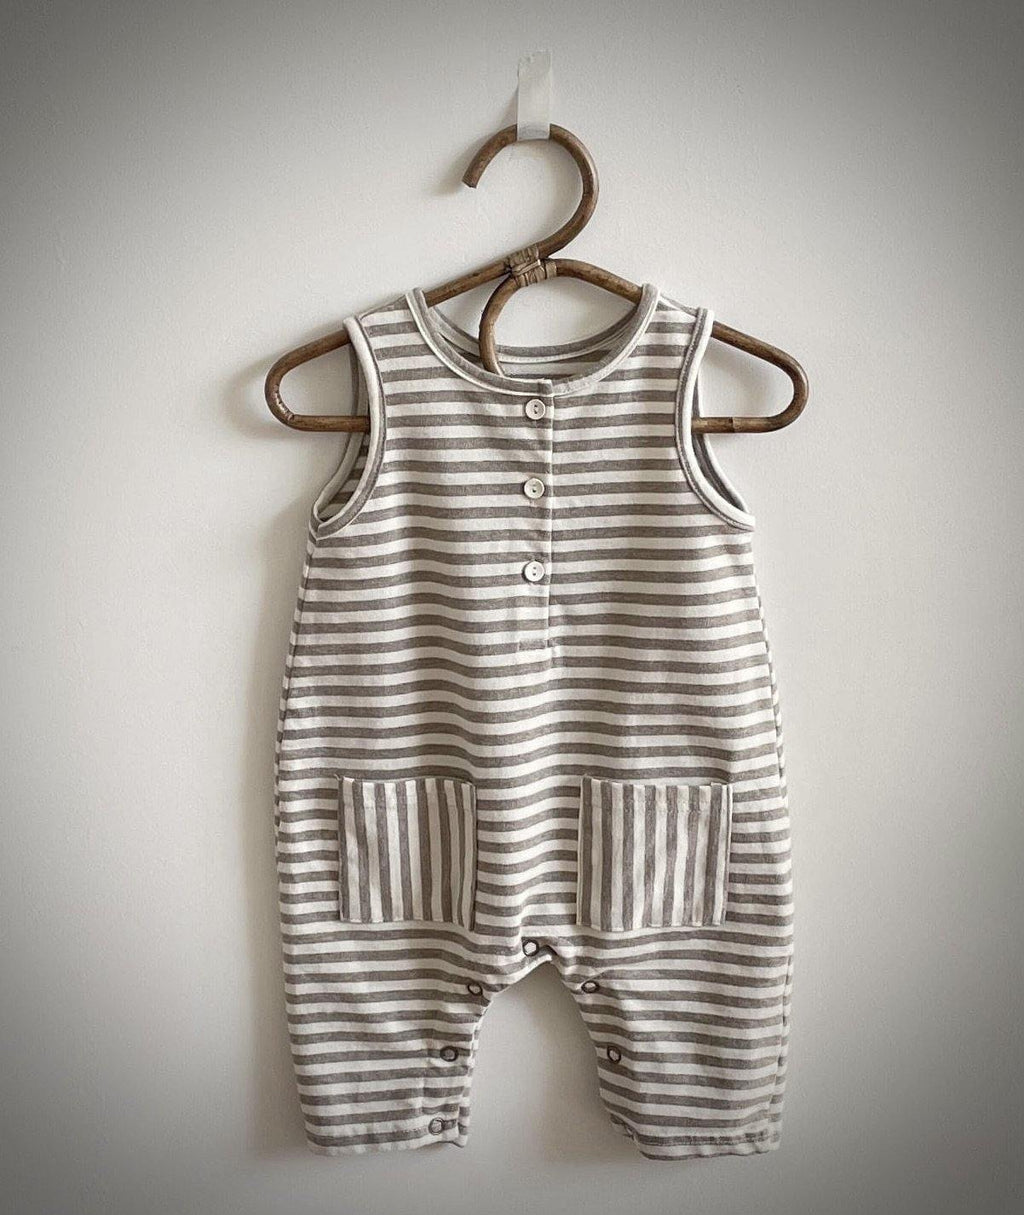 THE STRIPED BODYSUIT - Willows Cove 